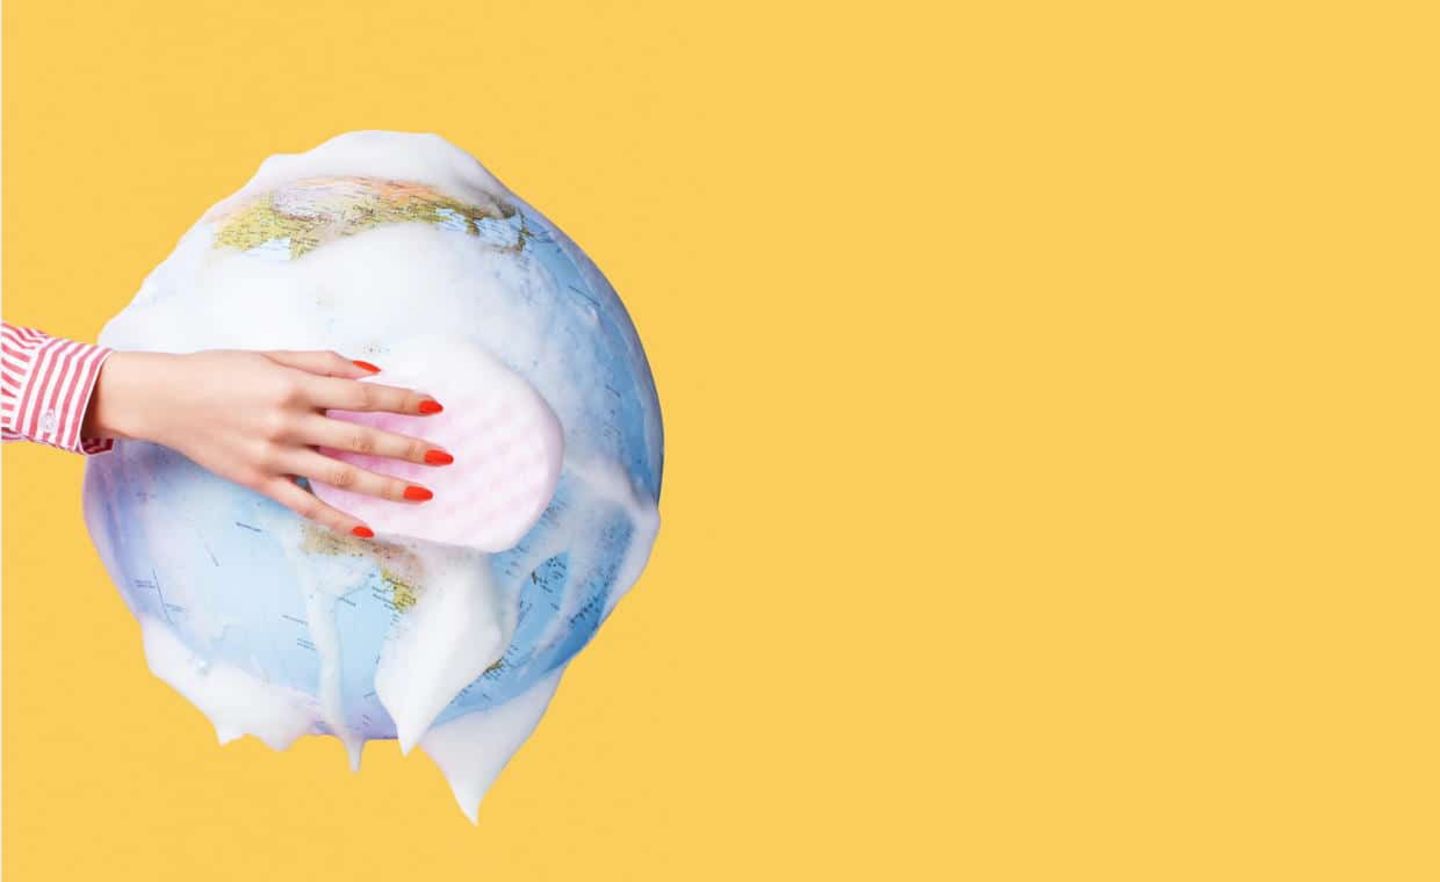 Still life image of a globe being washed by a hand with a sponge to symbolise cleaning and saving the planet.